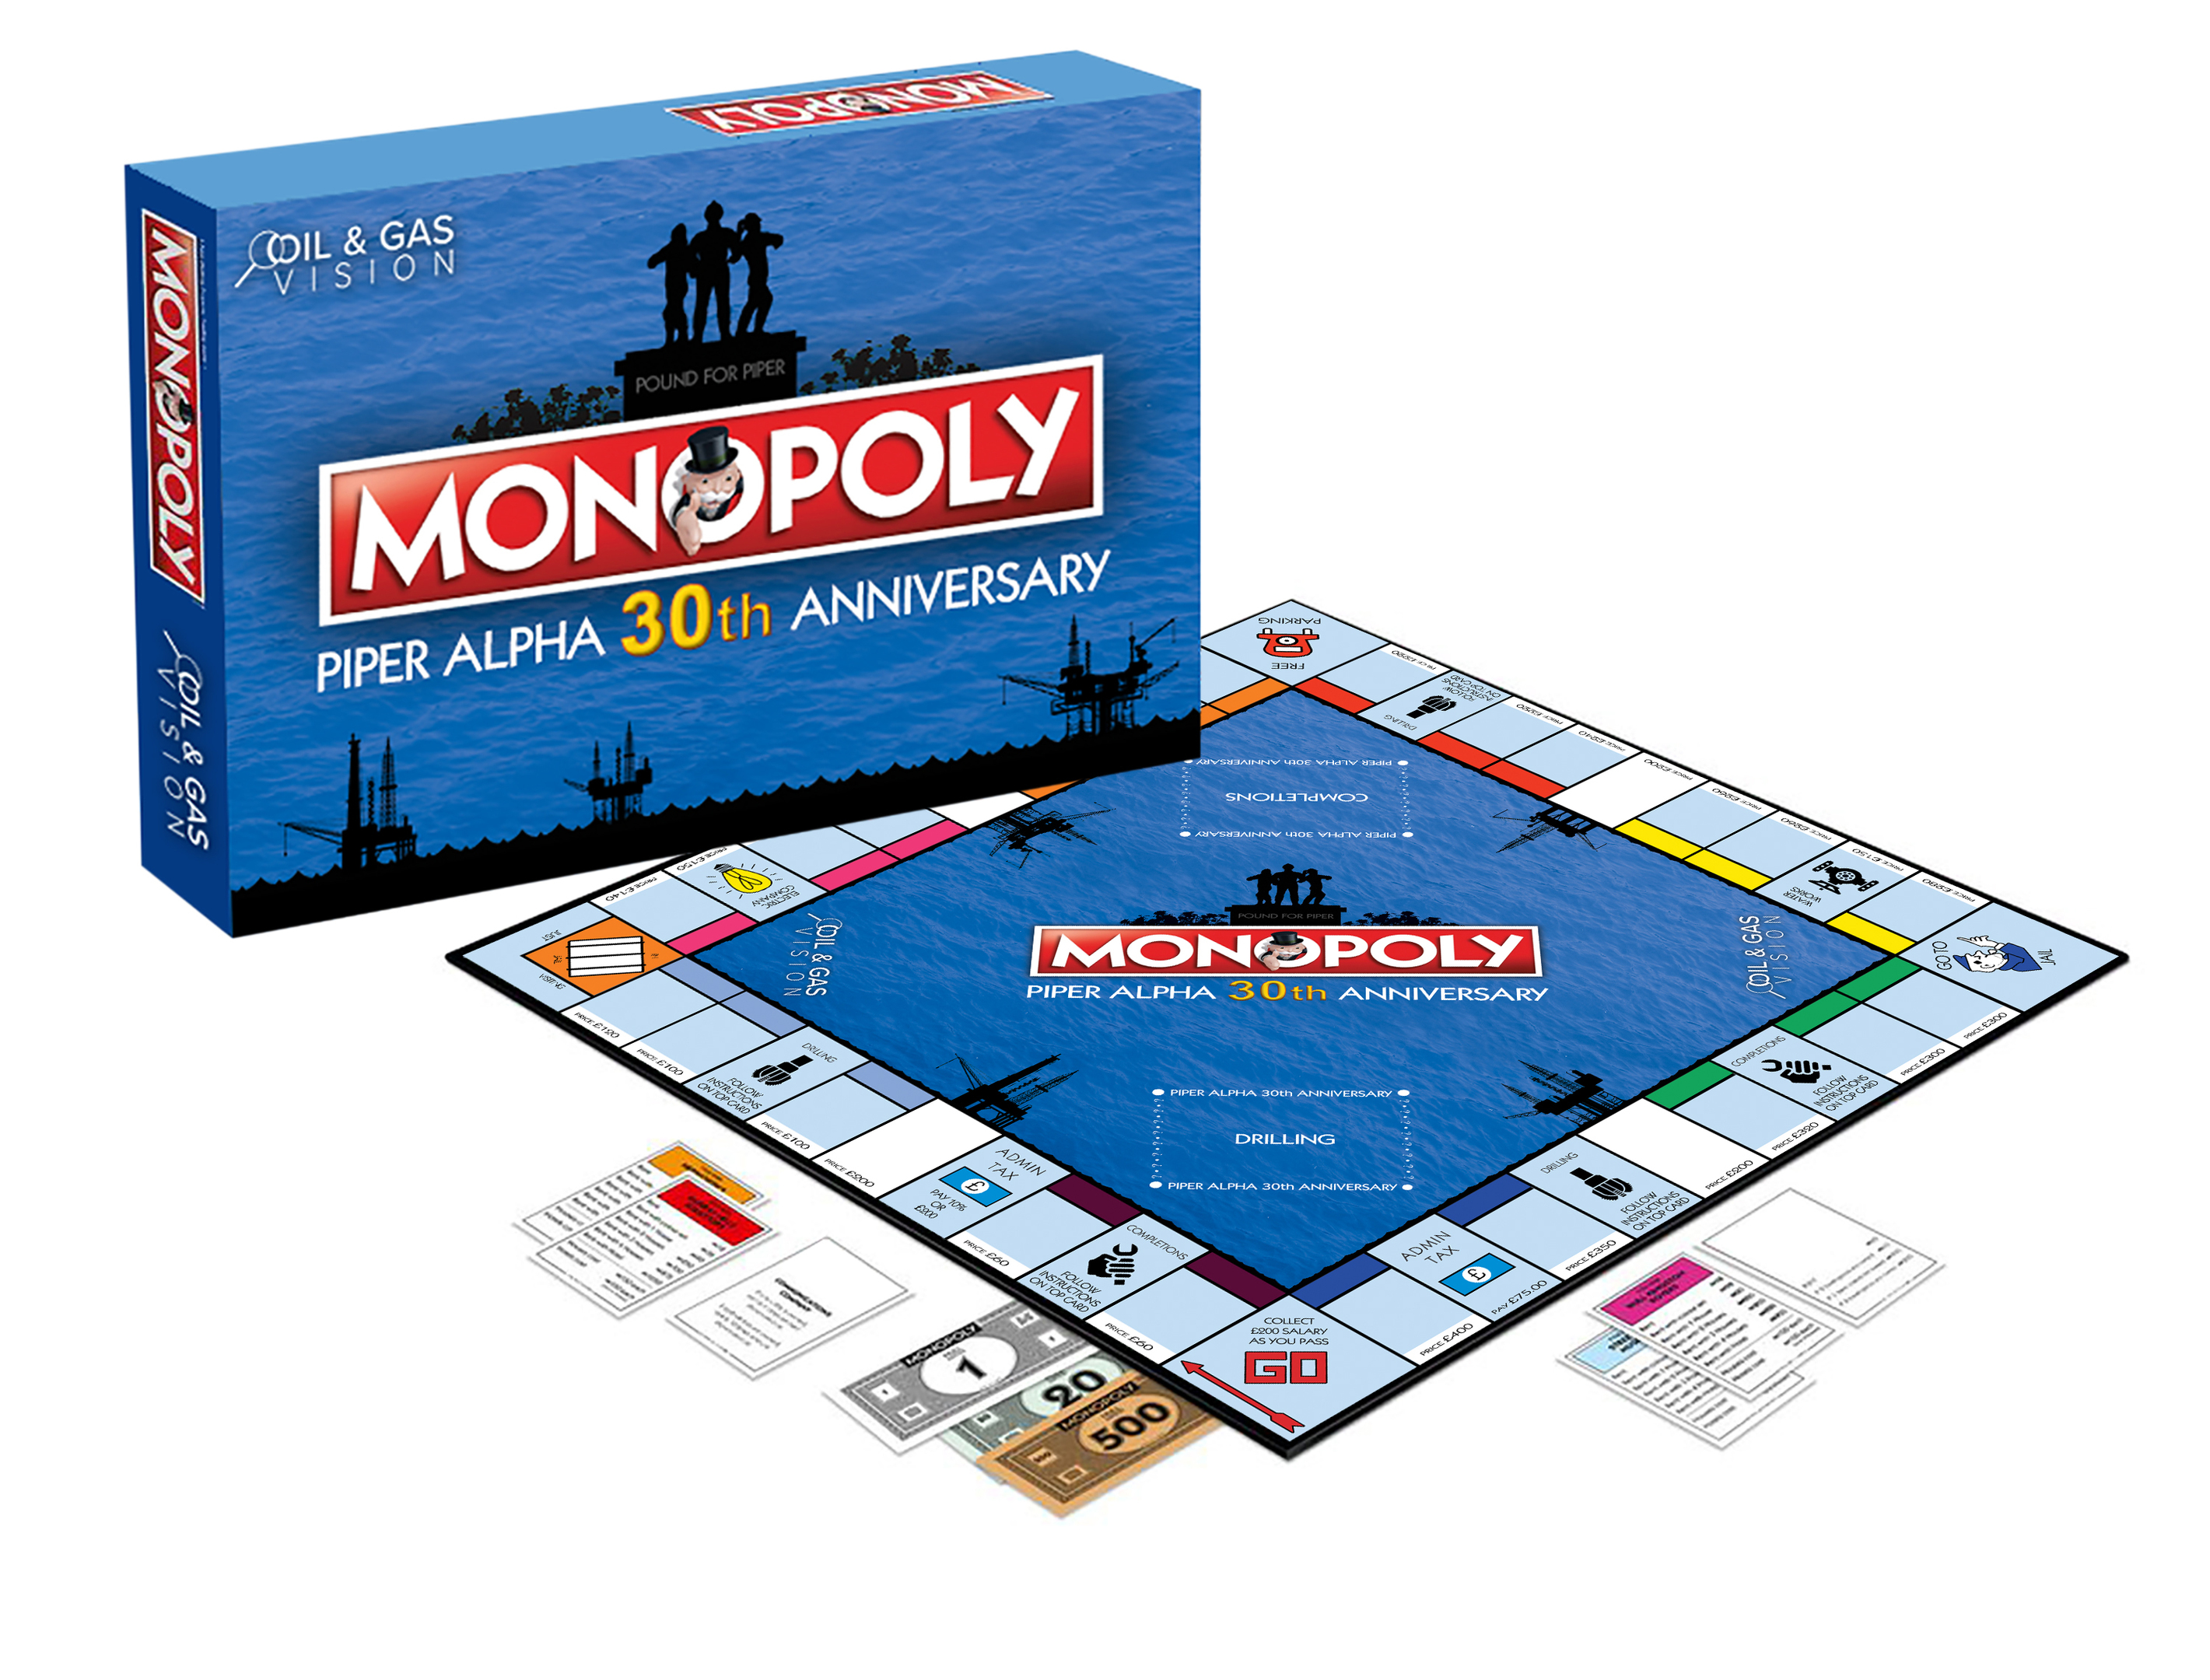 Piper Alpha 30th Anniversary Monopoly game.